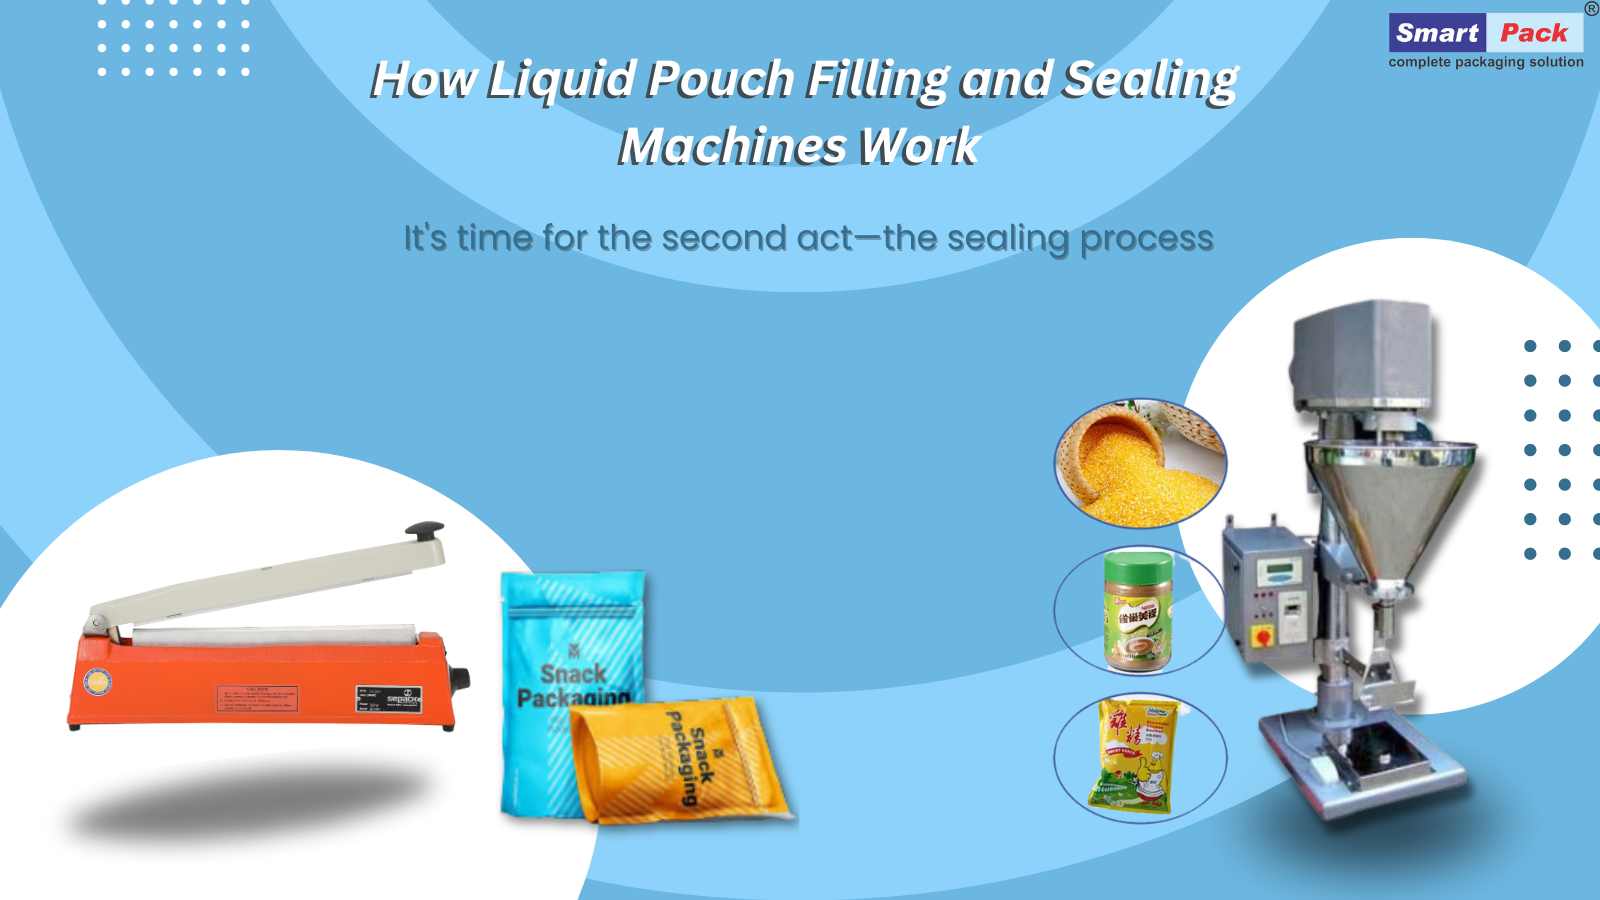 How Liquid Pouch Filling and Sealing Machines Work